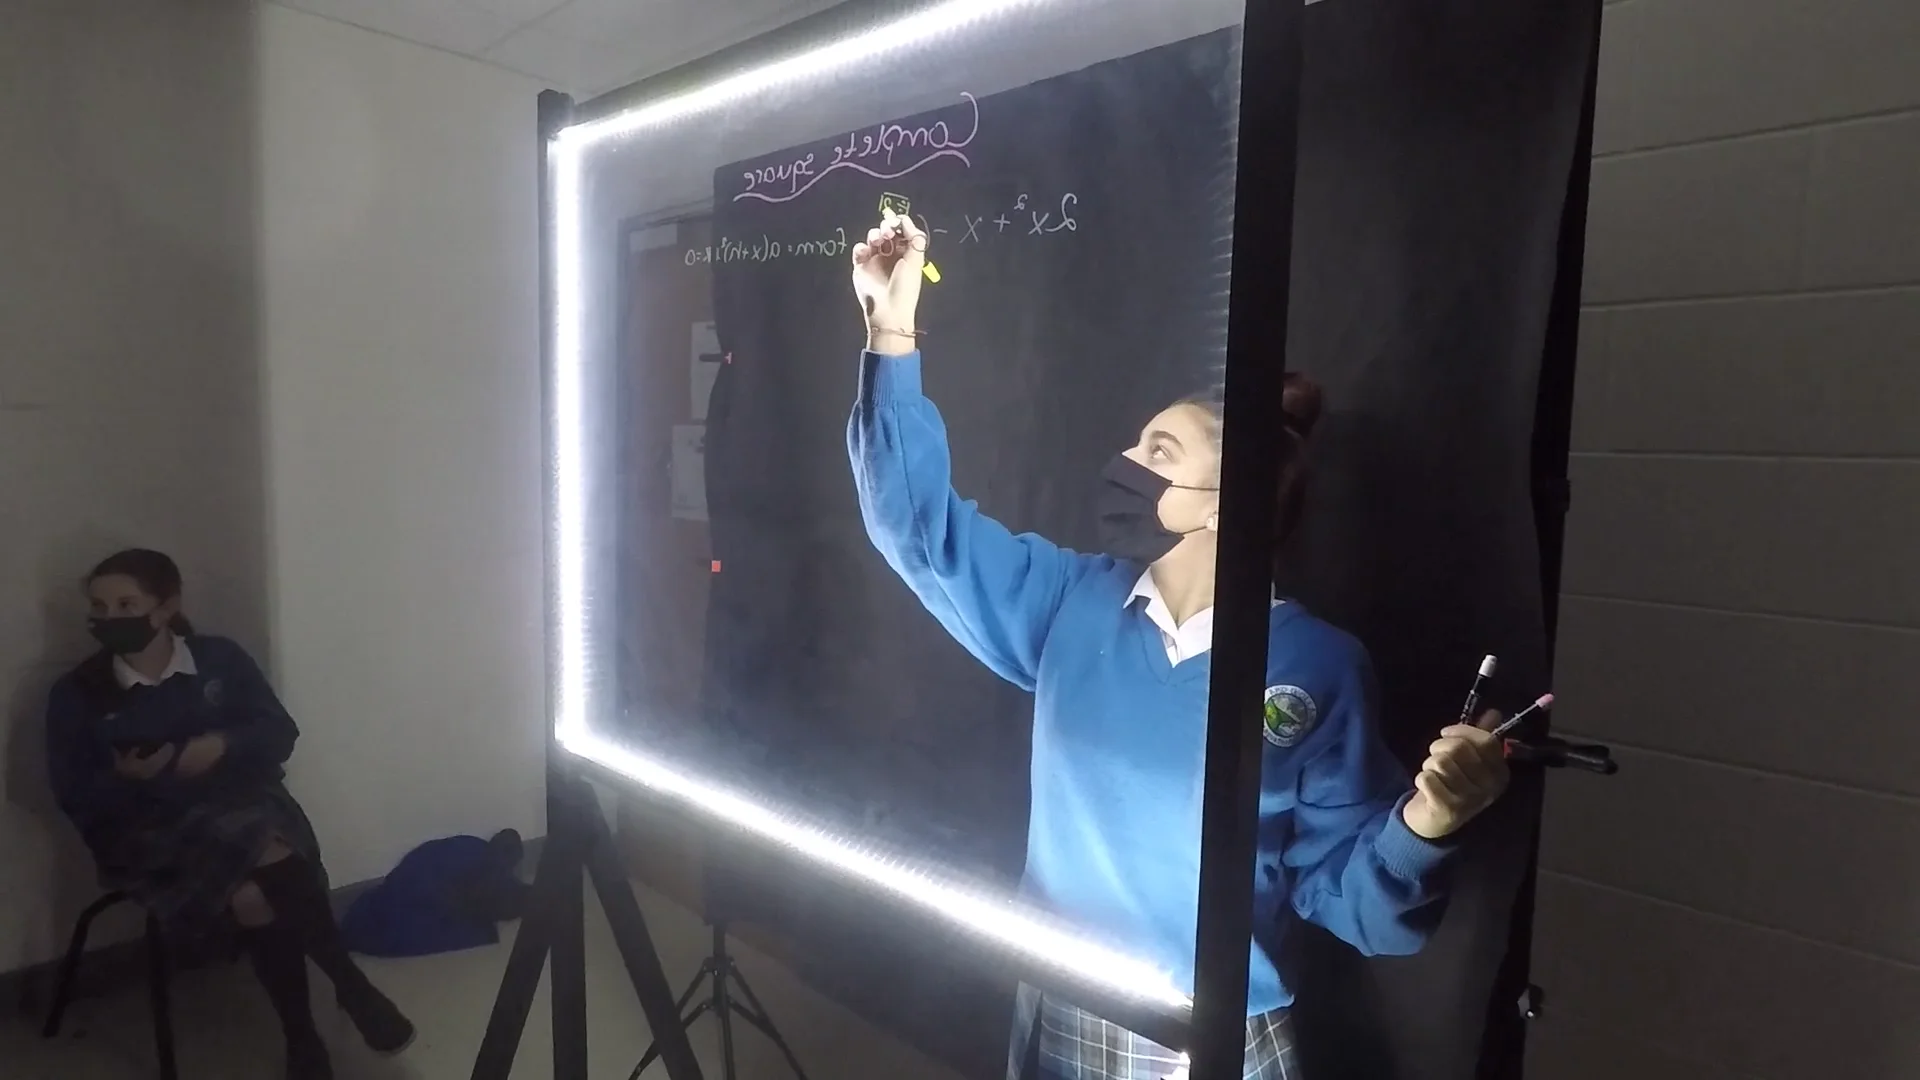 About Learning Glass - Educational Lightboard Technology